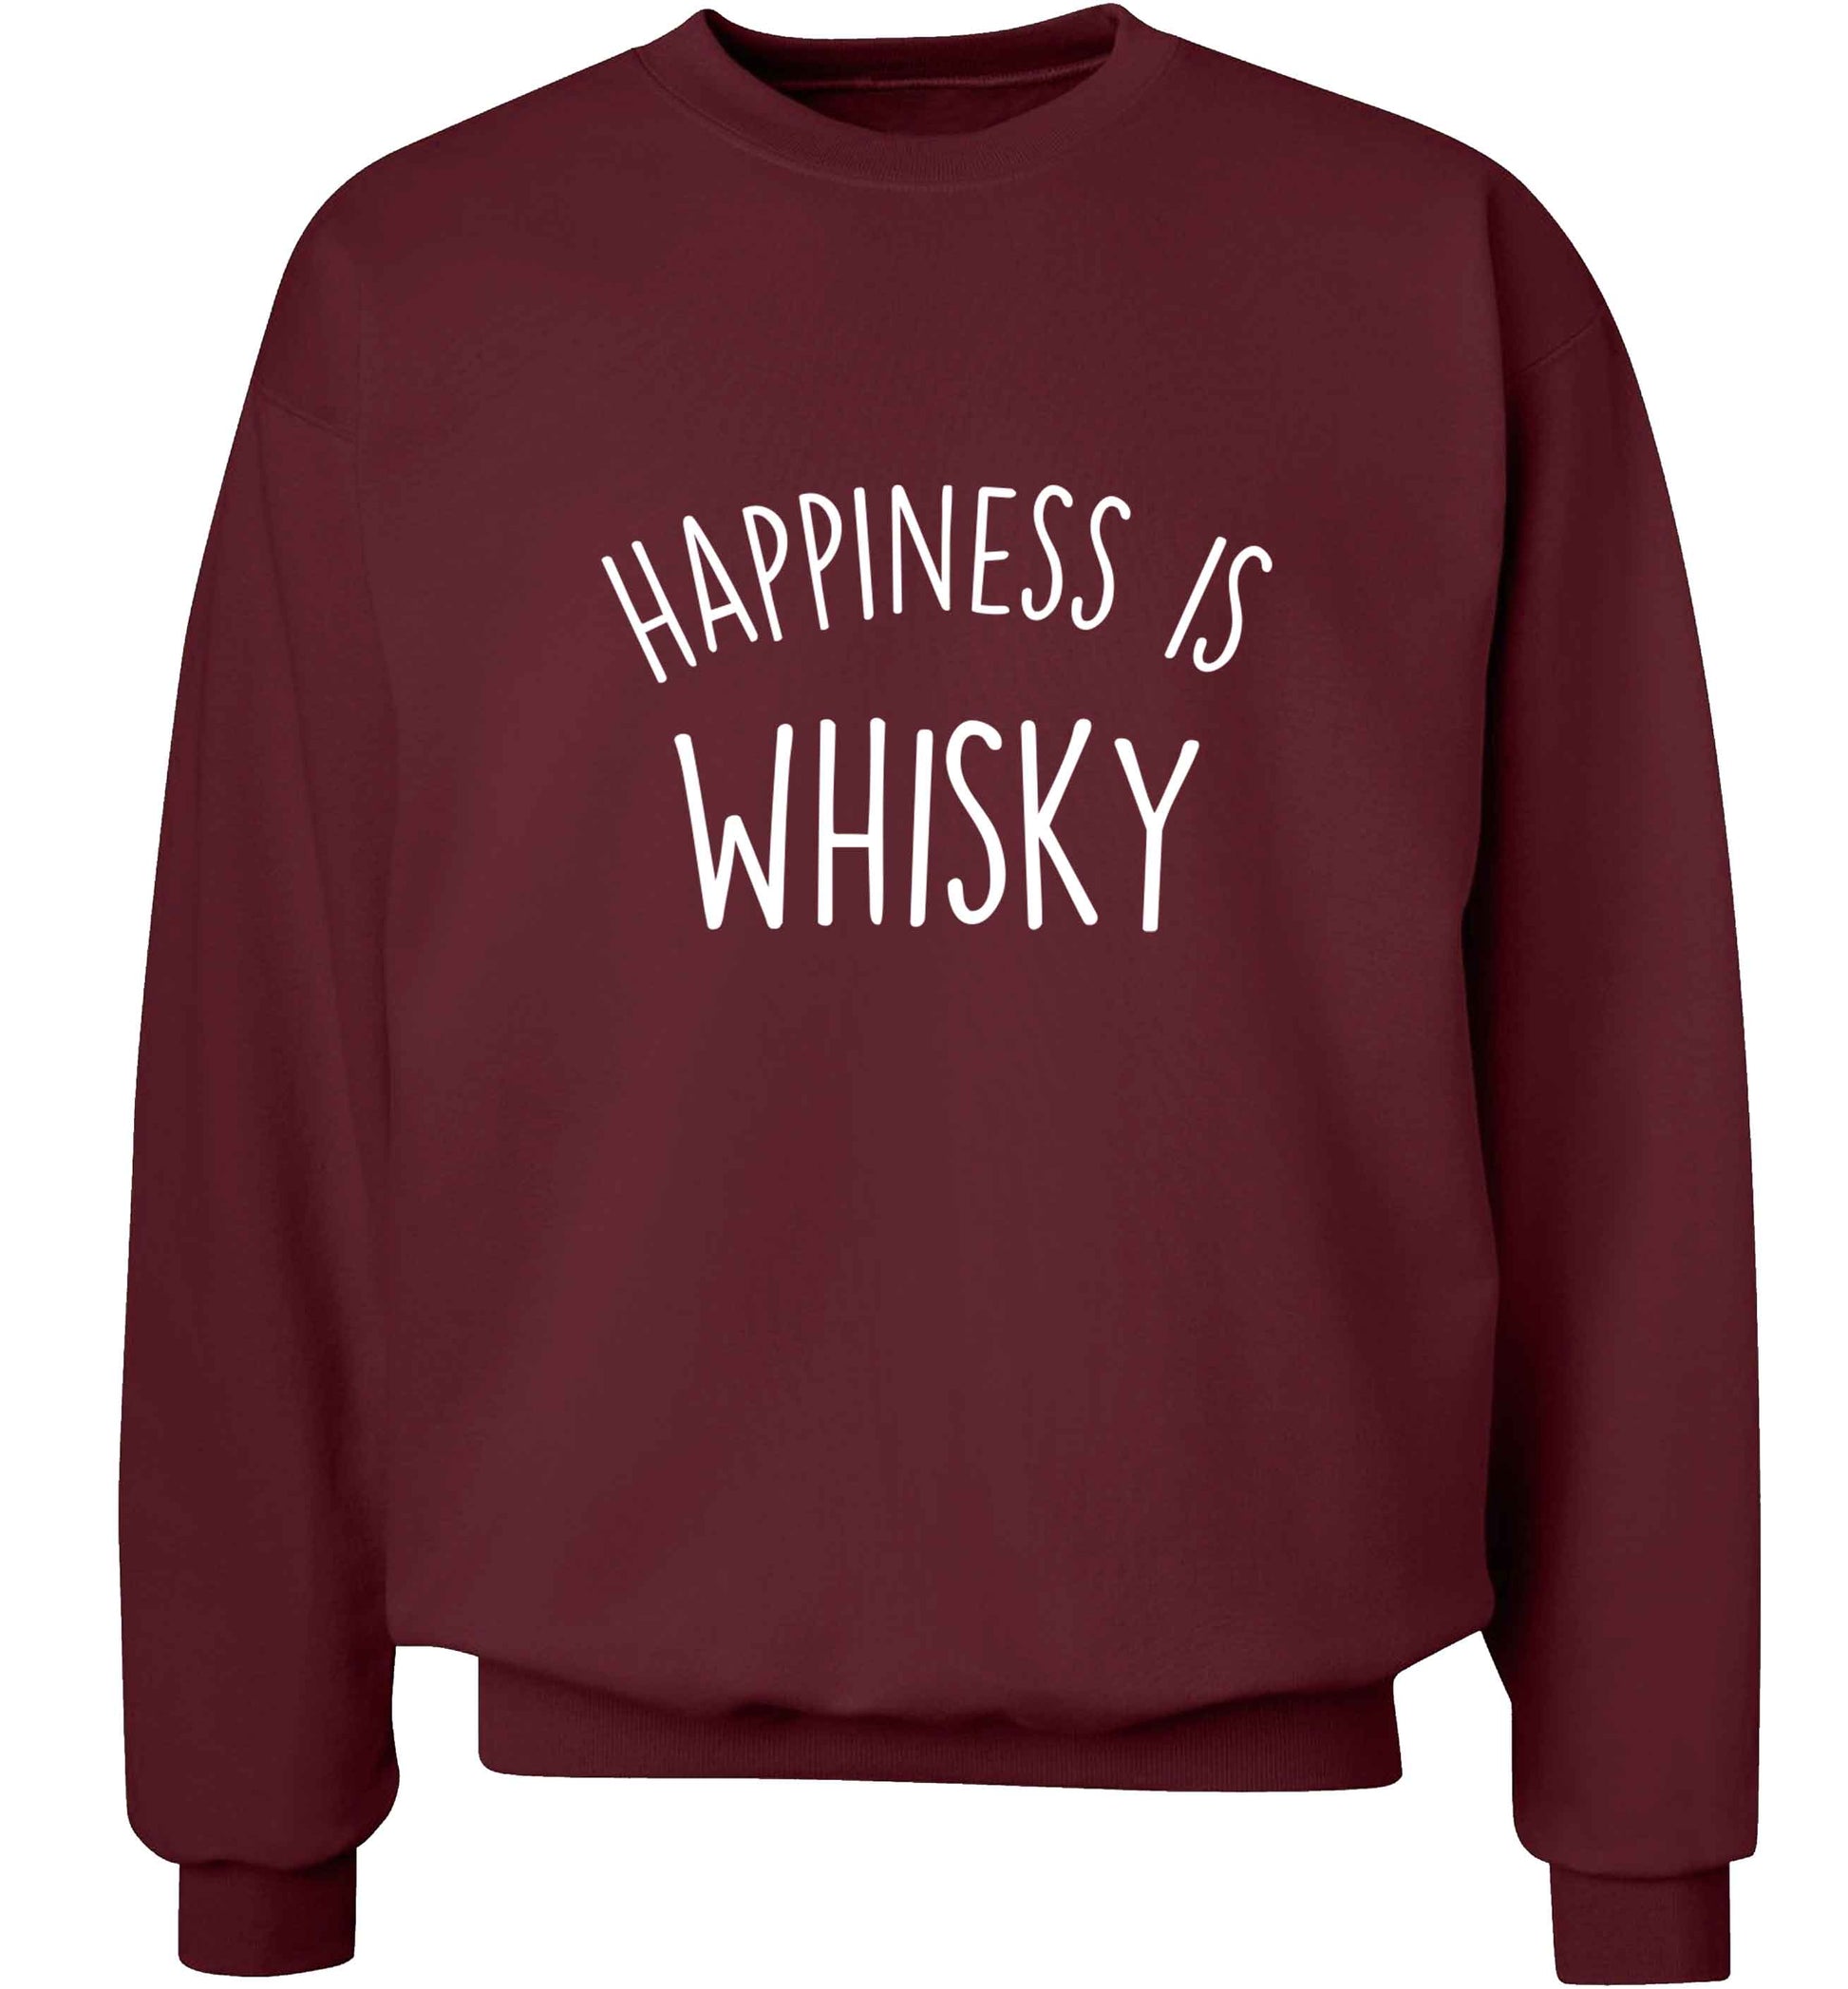 Happiness is whisky adult's unisex maroon sweater 2XL